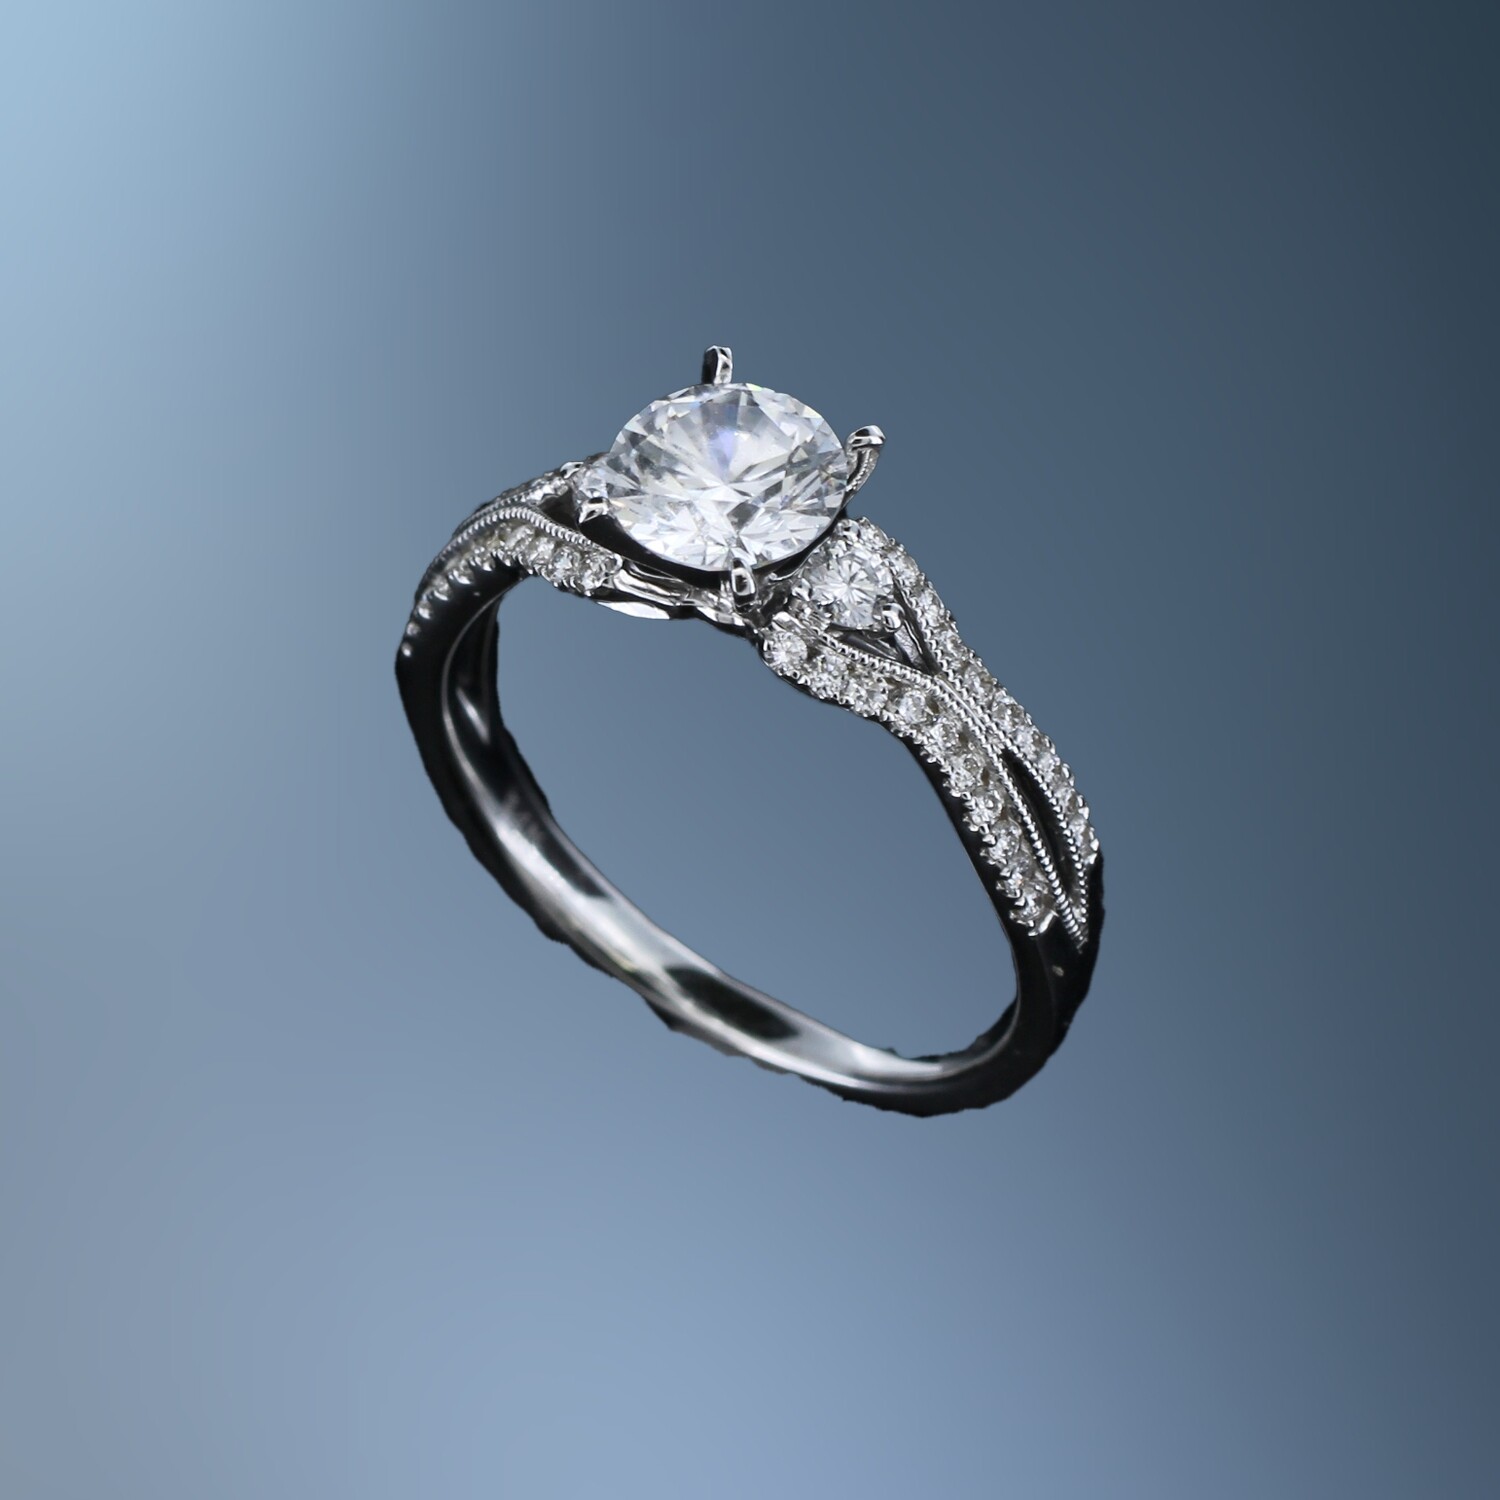 14KT WHITE GOLD ENGAGEMENT RING FEATURING 42 ROUND BRILLIANT CUT DIAMONDS TOTALING 0.33CTS